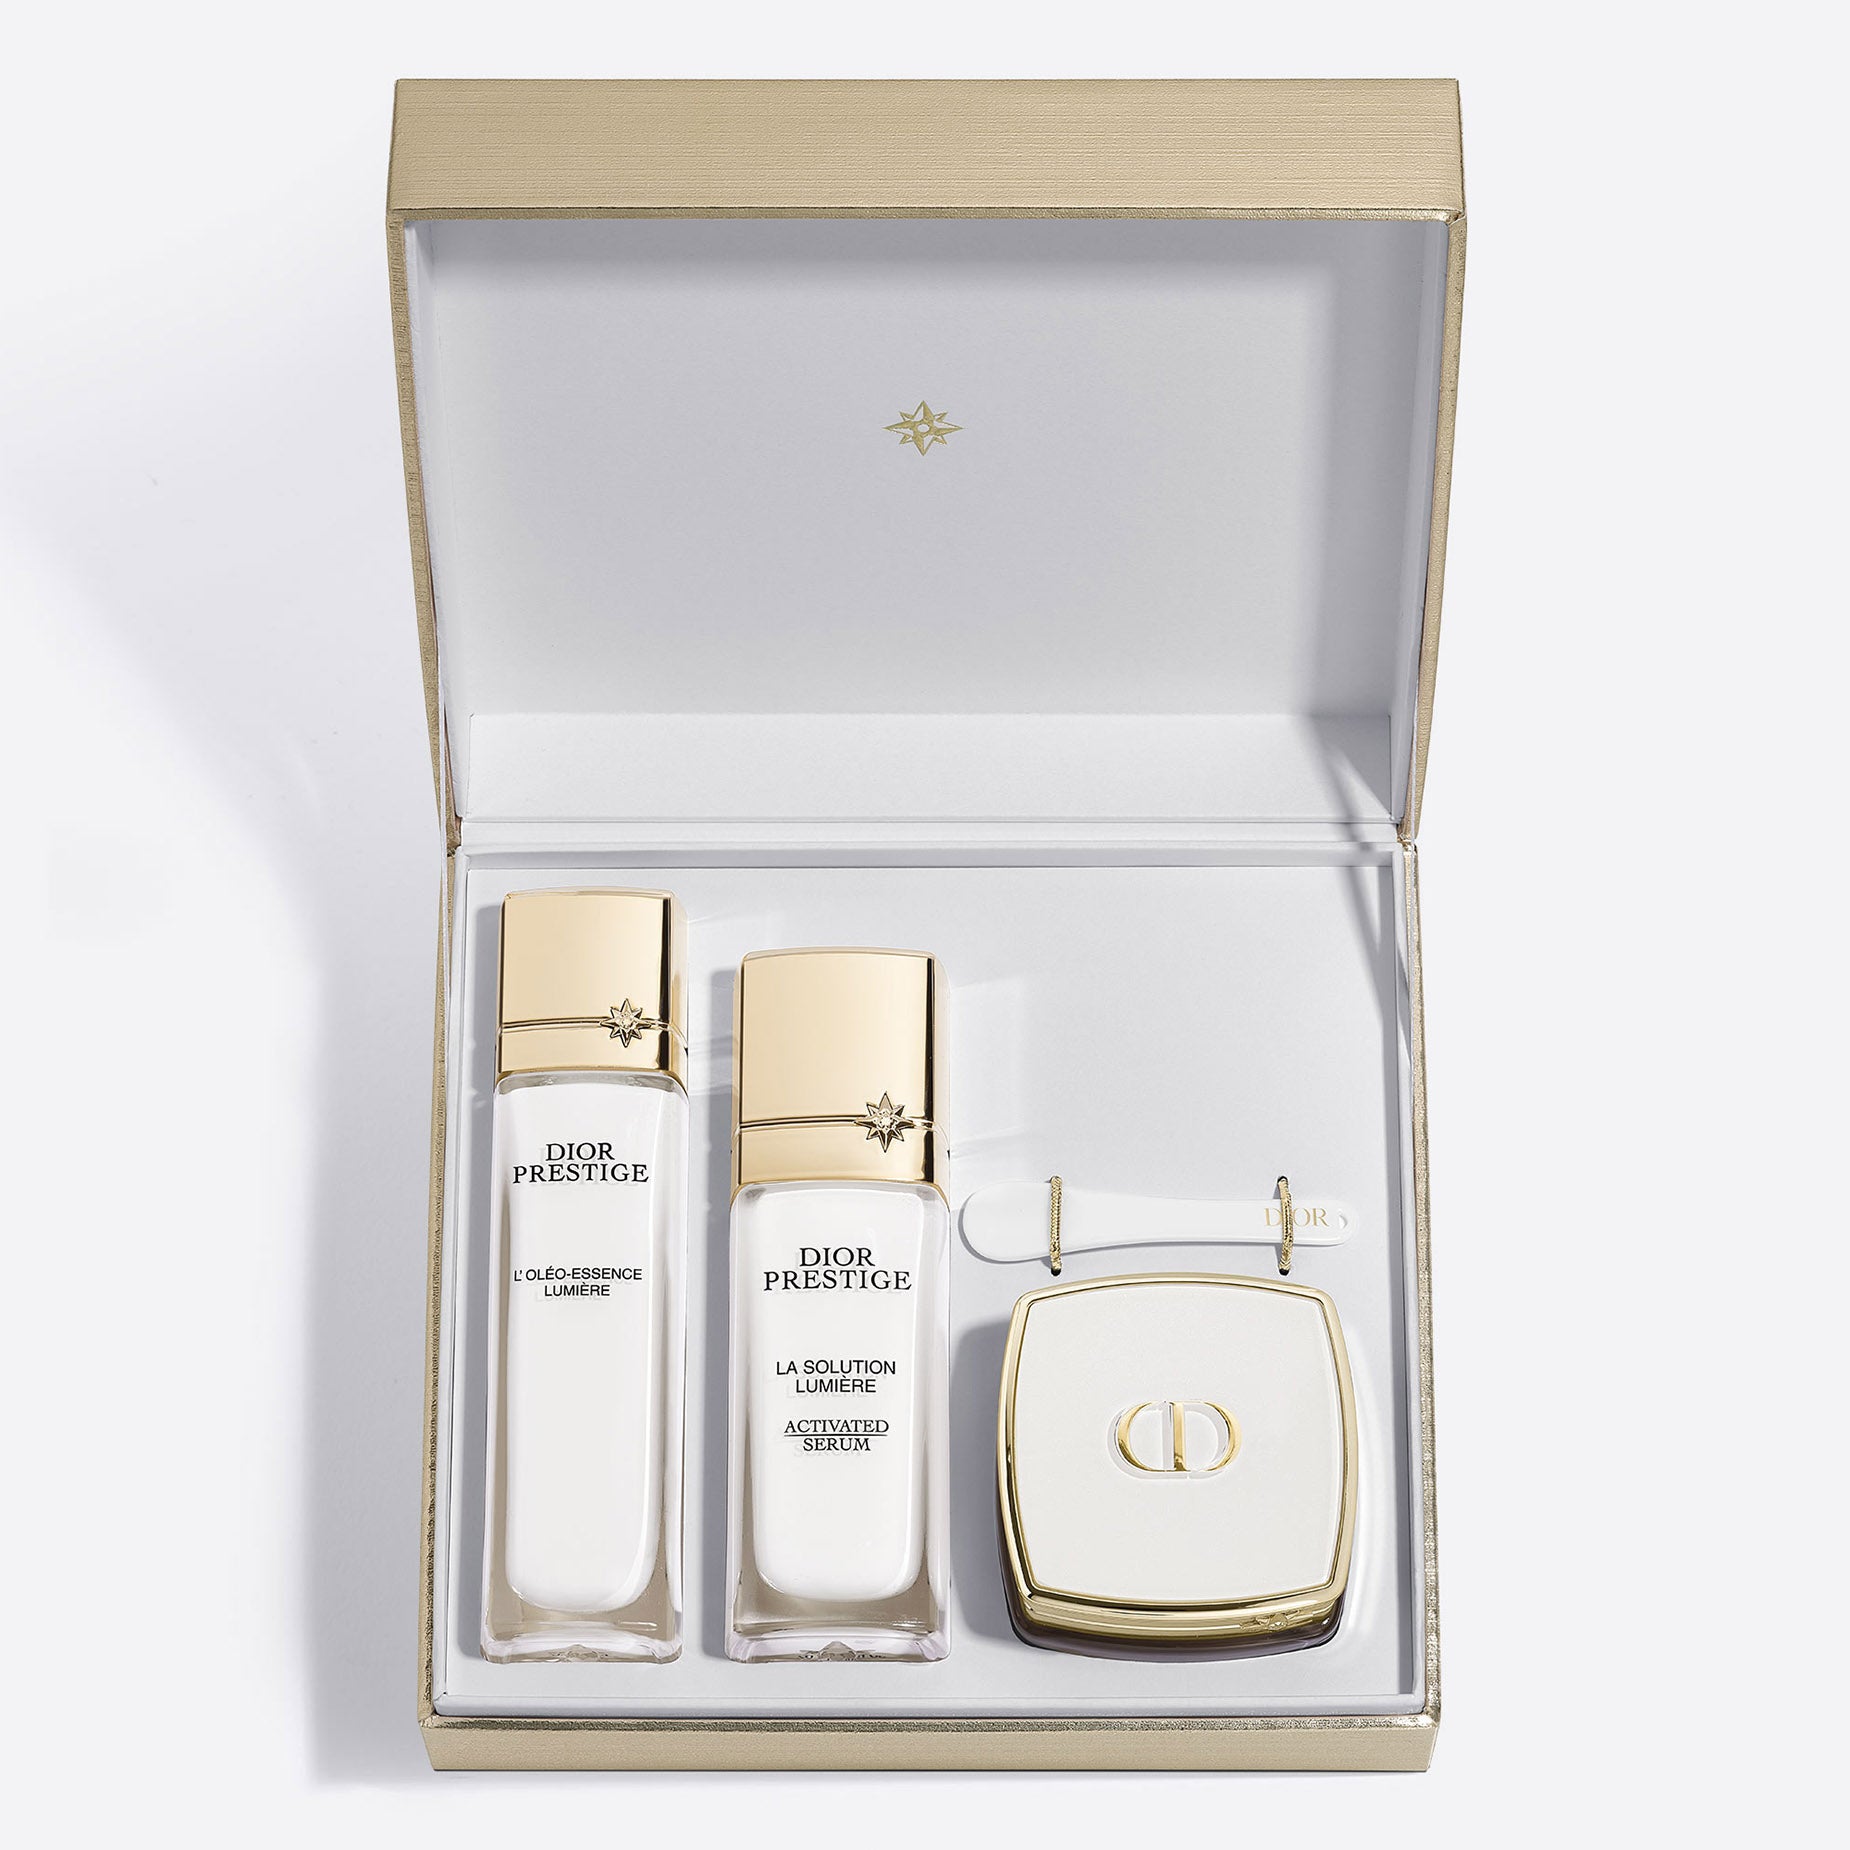 Dior Prestige – The Exceptional Brightening and Revitalizing Ritual ~ Facial Skincare Set – Exfoliating Lotion, Serum and Emulsion